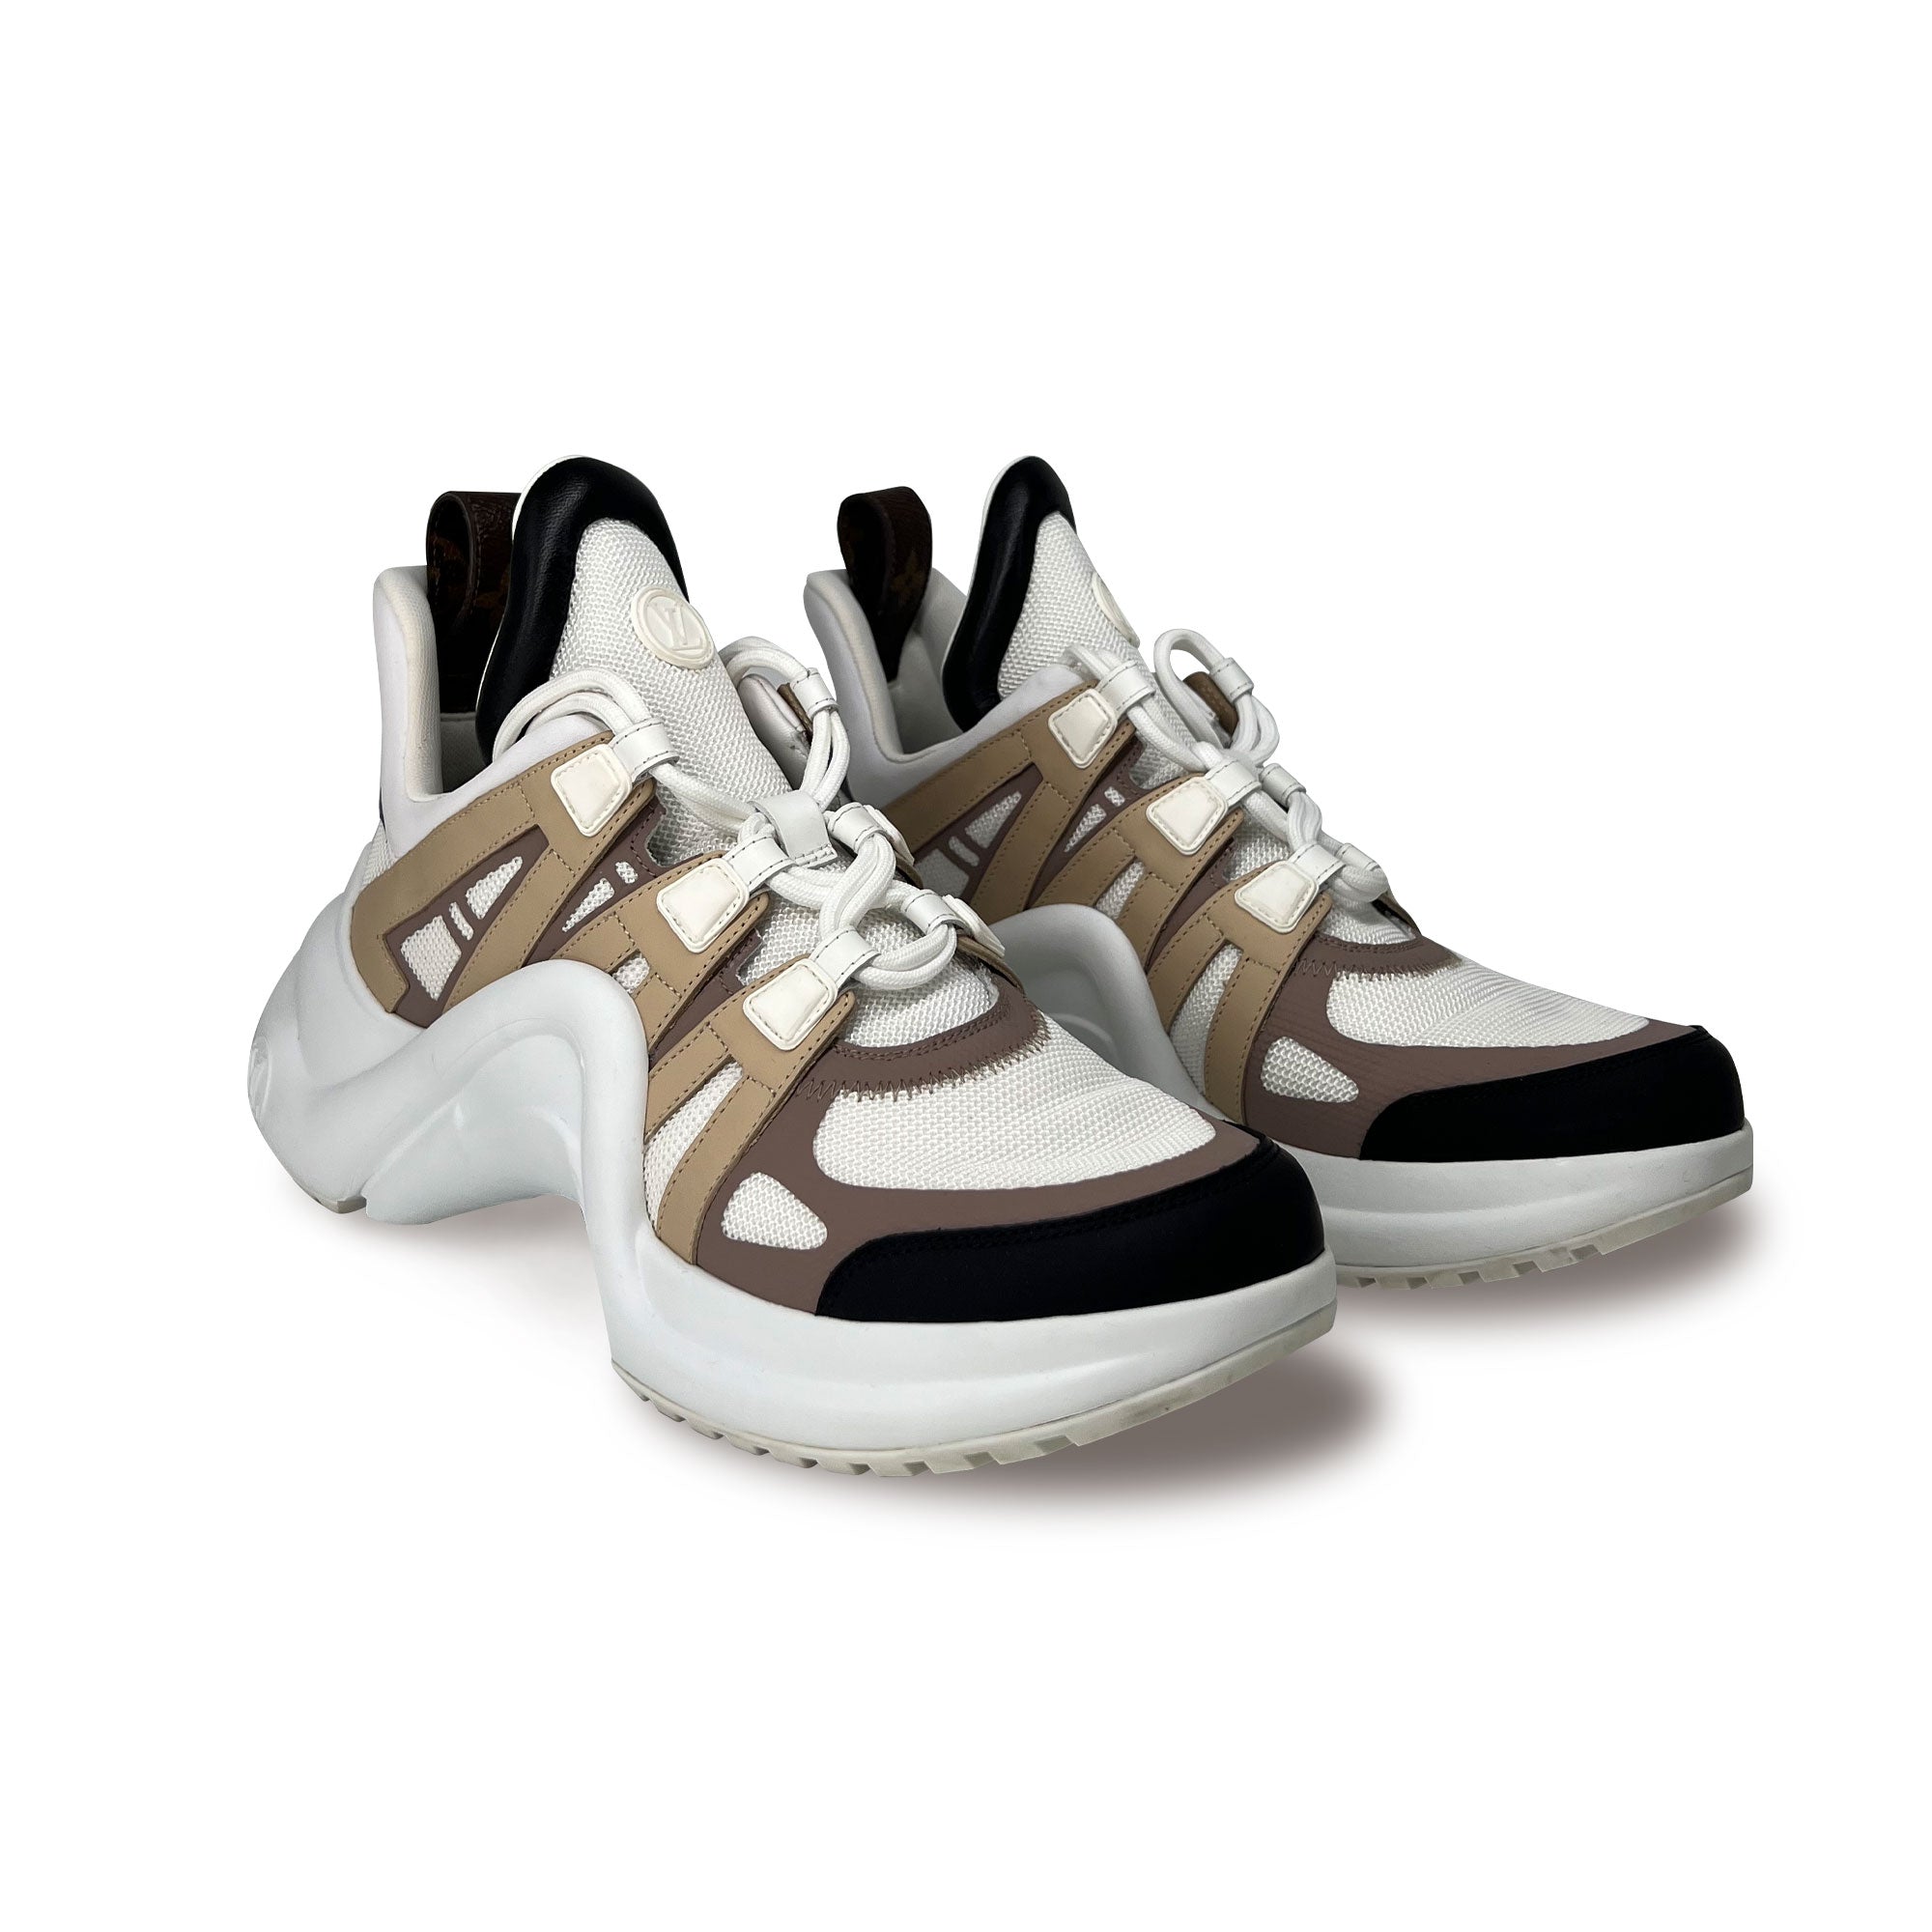 Louis Vuitton LV Archlight sneaker – VintageBooBoo Pre owned designer bags,  shoes, clothes